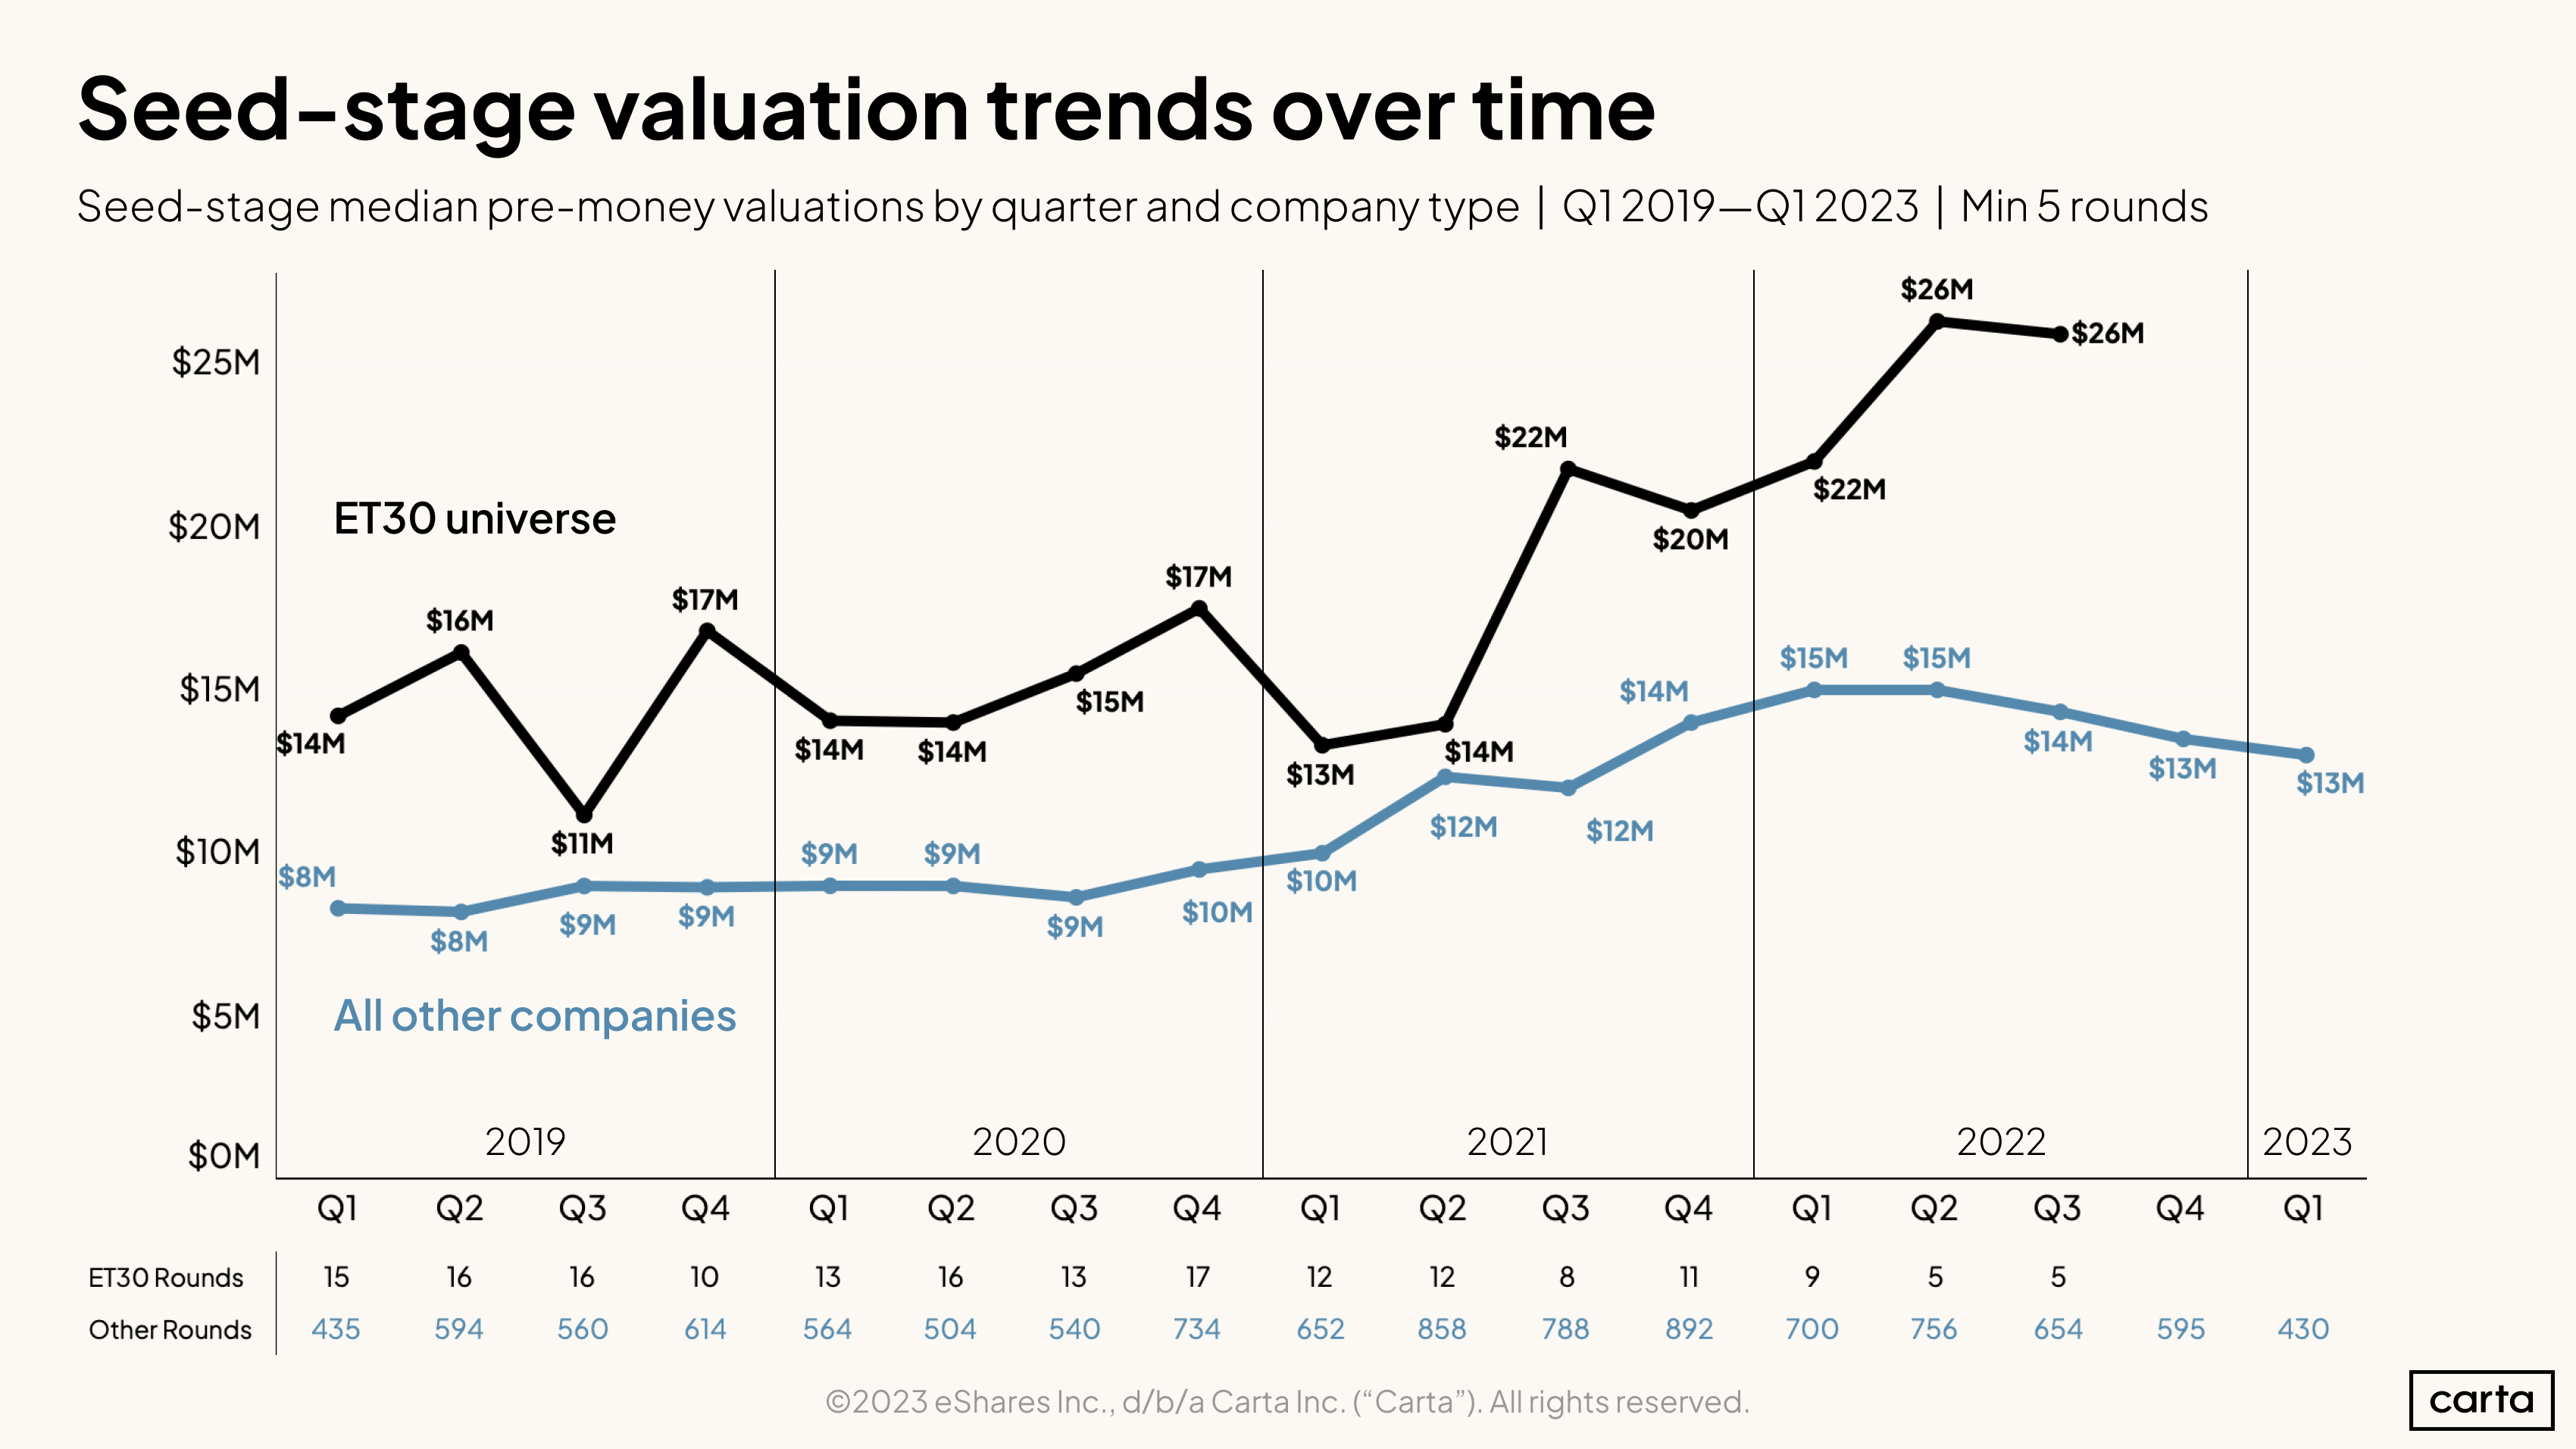 Seed-stage median pre-money valuations by quarter and company type | Q1 2019-Q1 2023